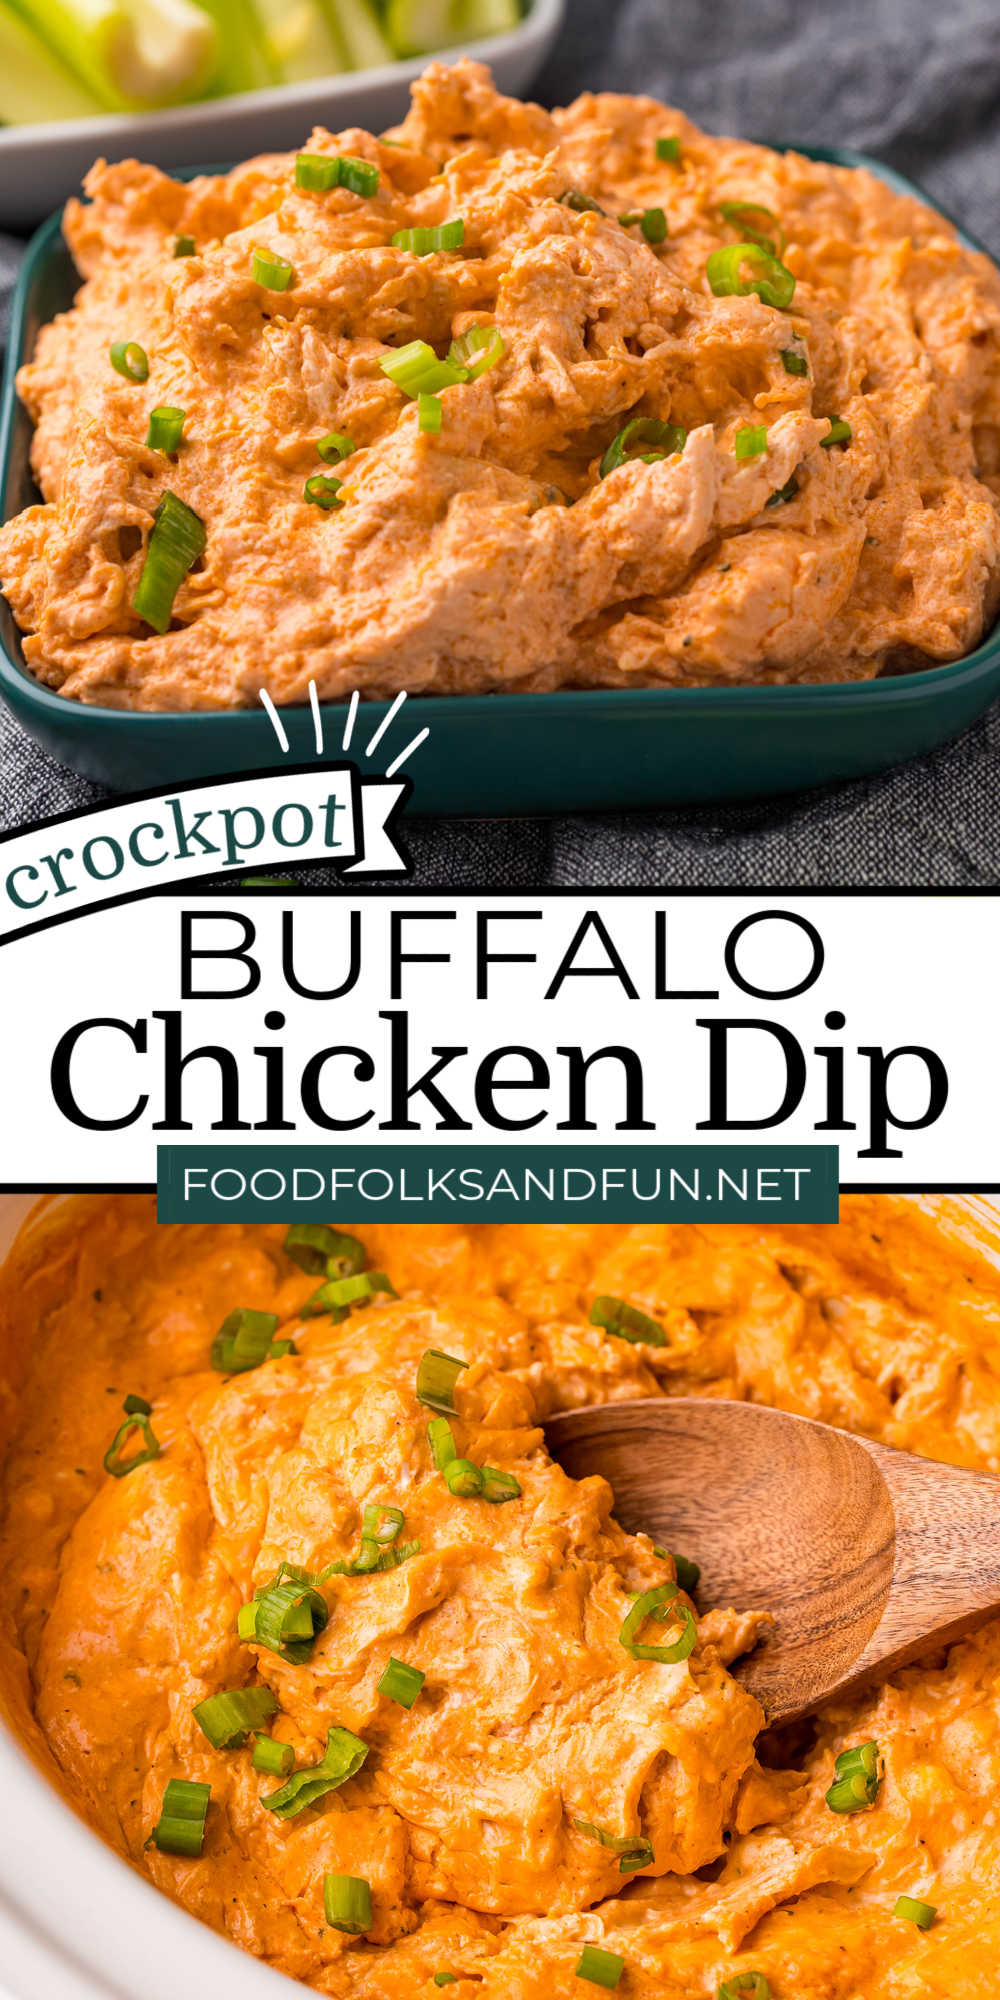 This Crockpot Buffalo Chicken Dip has a classic buffalo wing flavor but transformed into an easy-to-make dip. The dip is irresistible, creamy, and even keto! via @foodfolksandfun